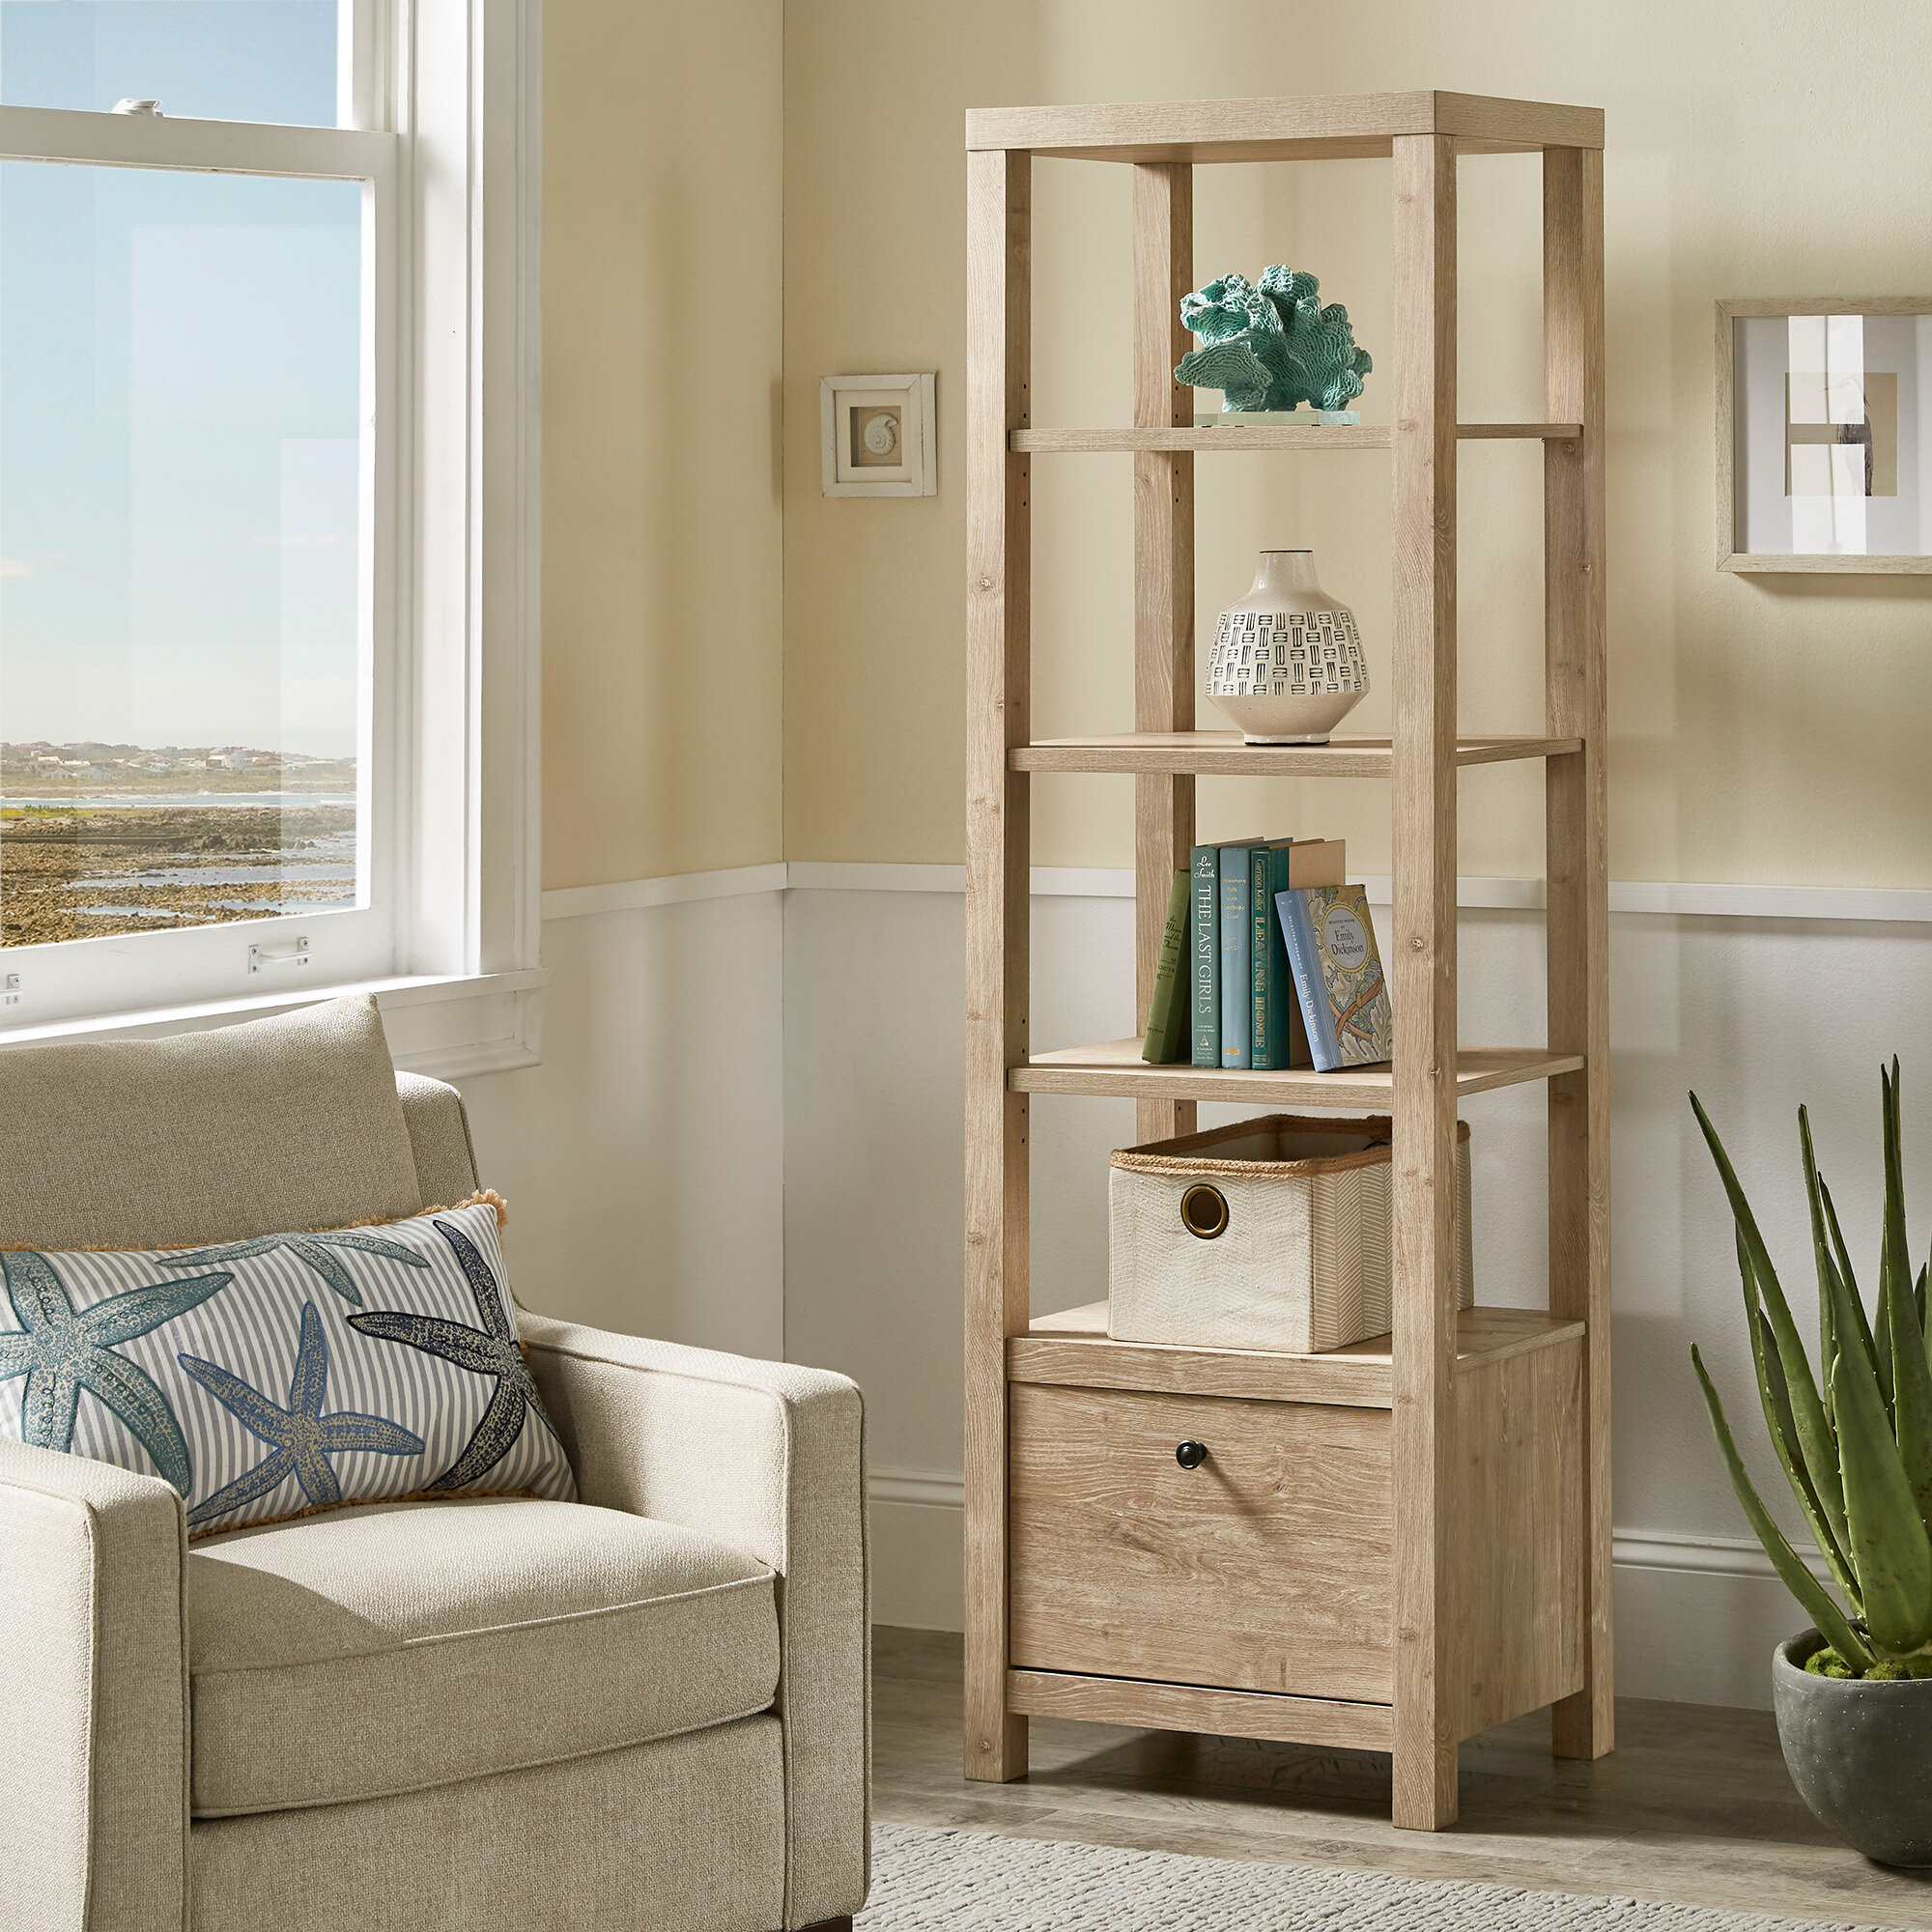 Gracyn 8-Tier Narrow Bookshelf with Adjustable Shelves Millwood Pines Color: White